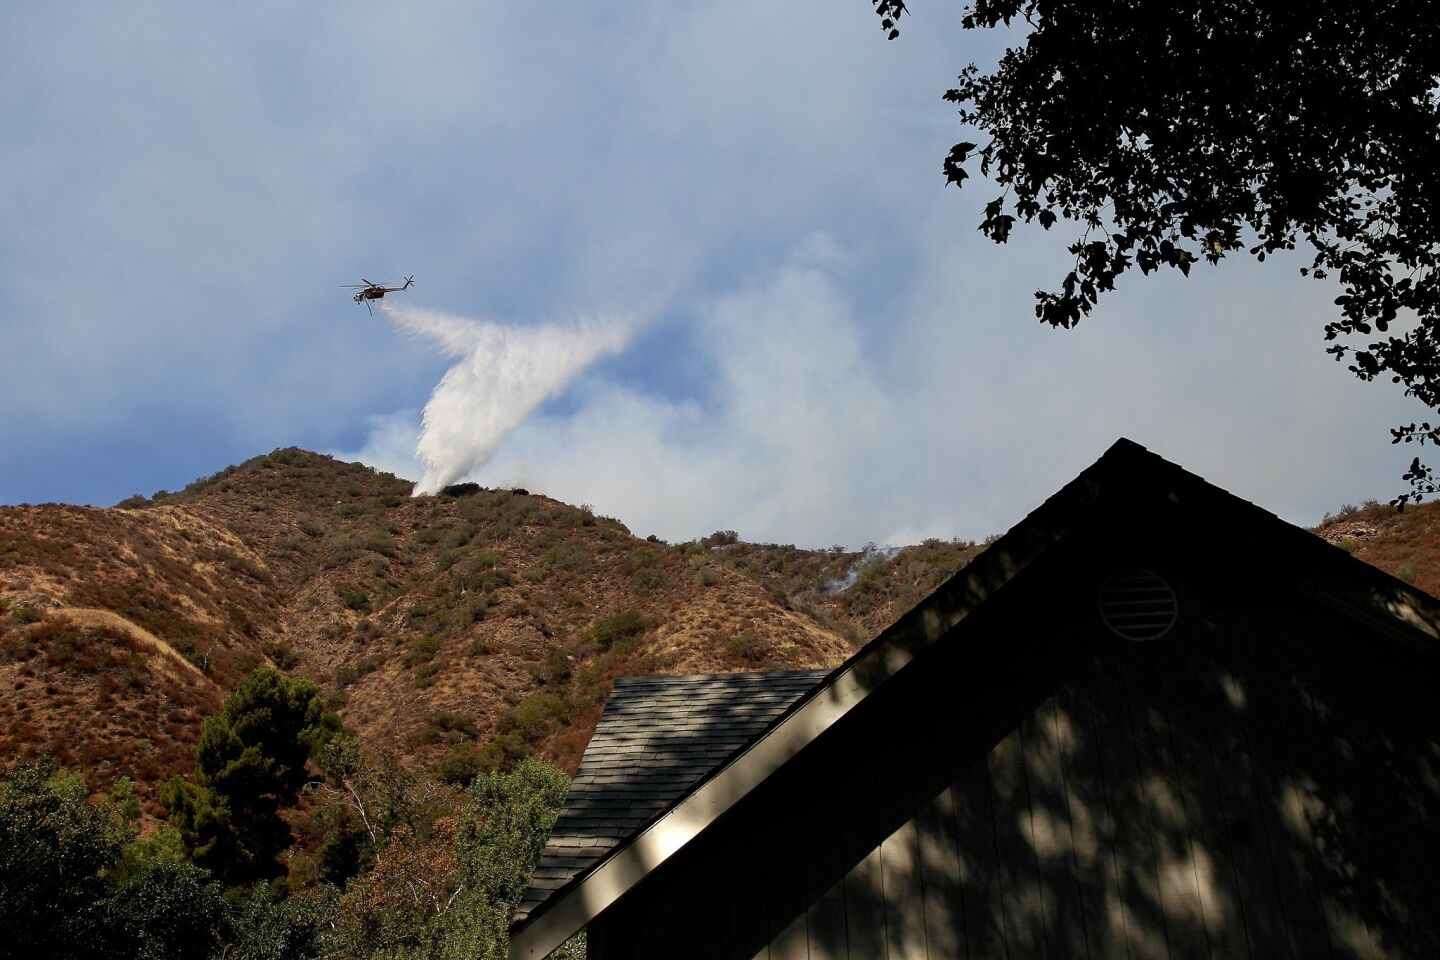 An Orange County Fire Authority helicopter makes a water drop on a brush fire near homes on Silverado Canyon Road.